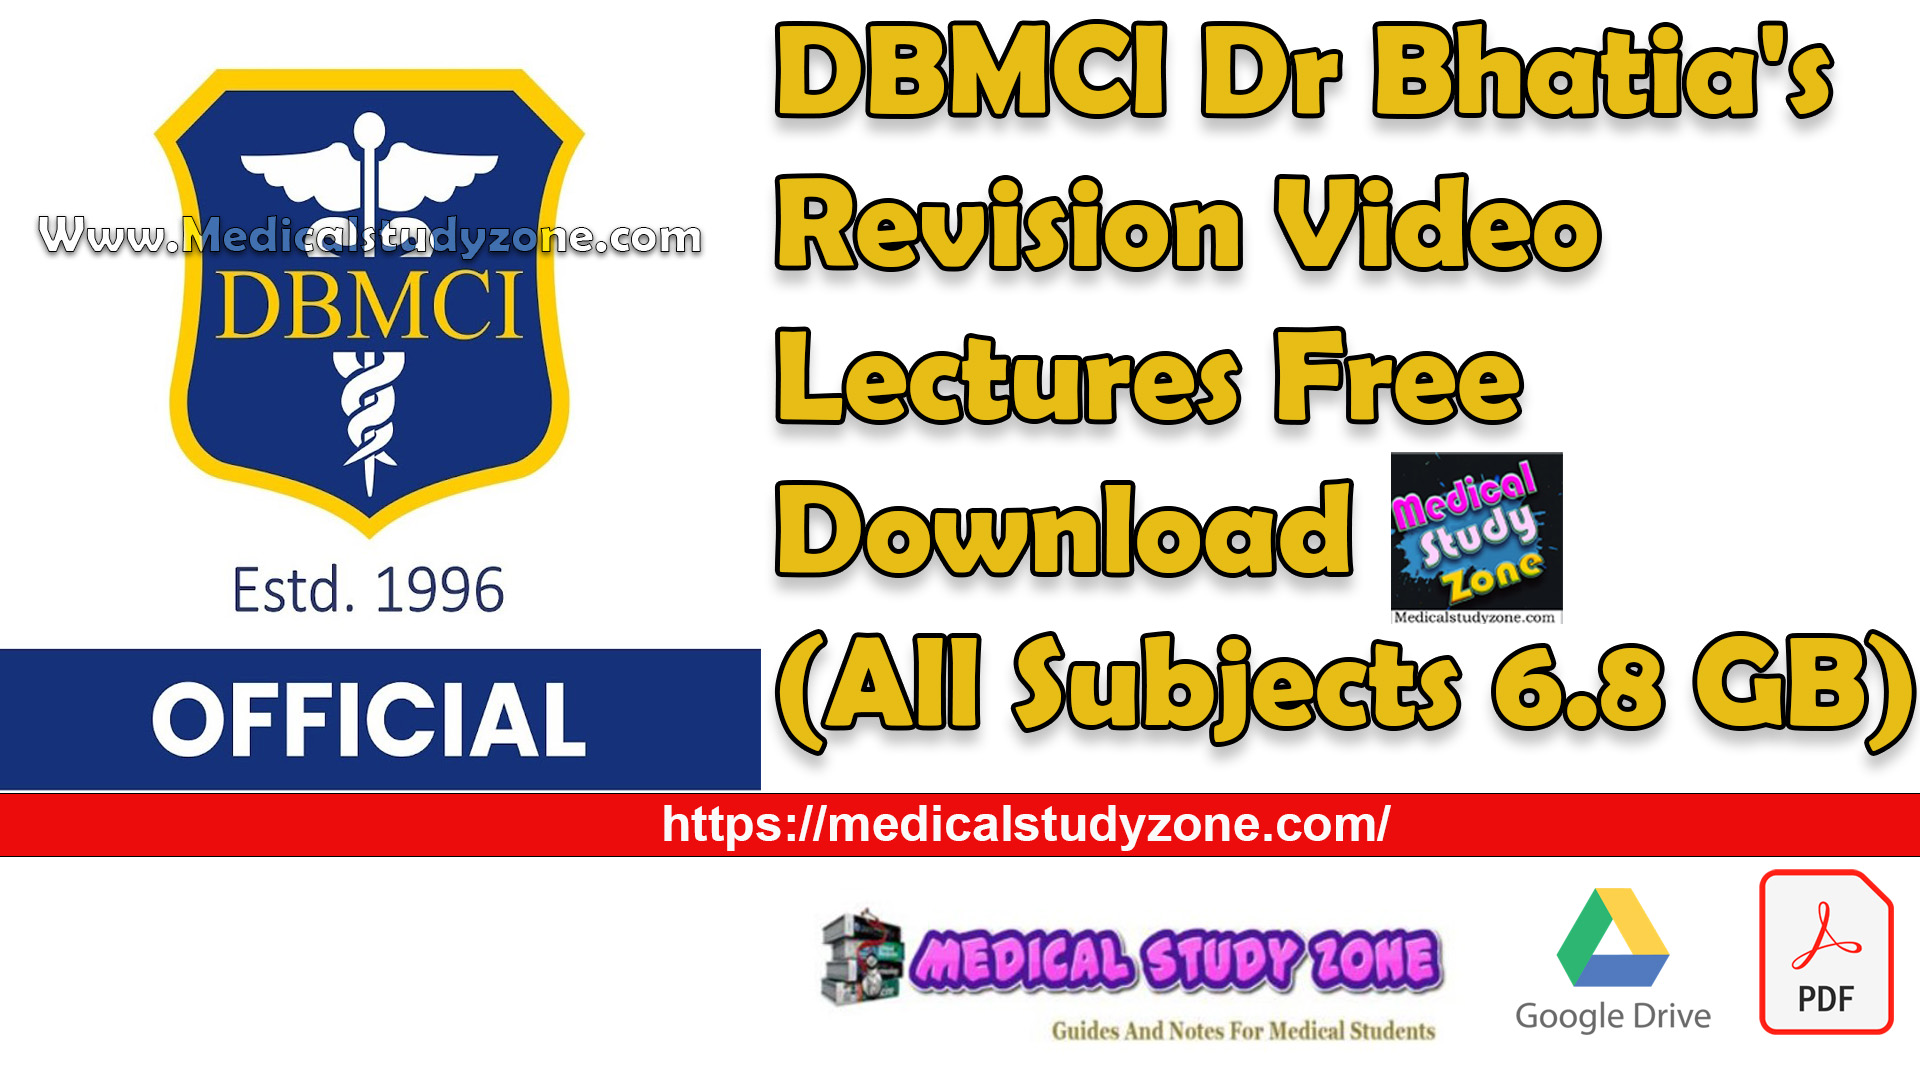 DBMCI Dr Bhatia's Revision Video Lectures 2023 Free Download (All Subjects 6.8 GB)